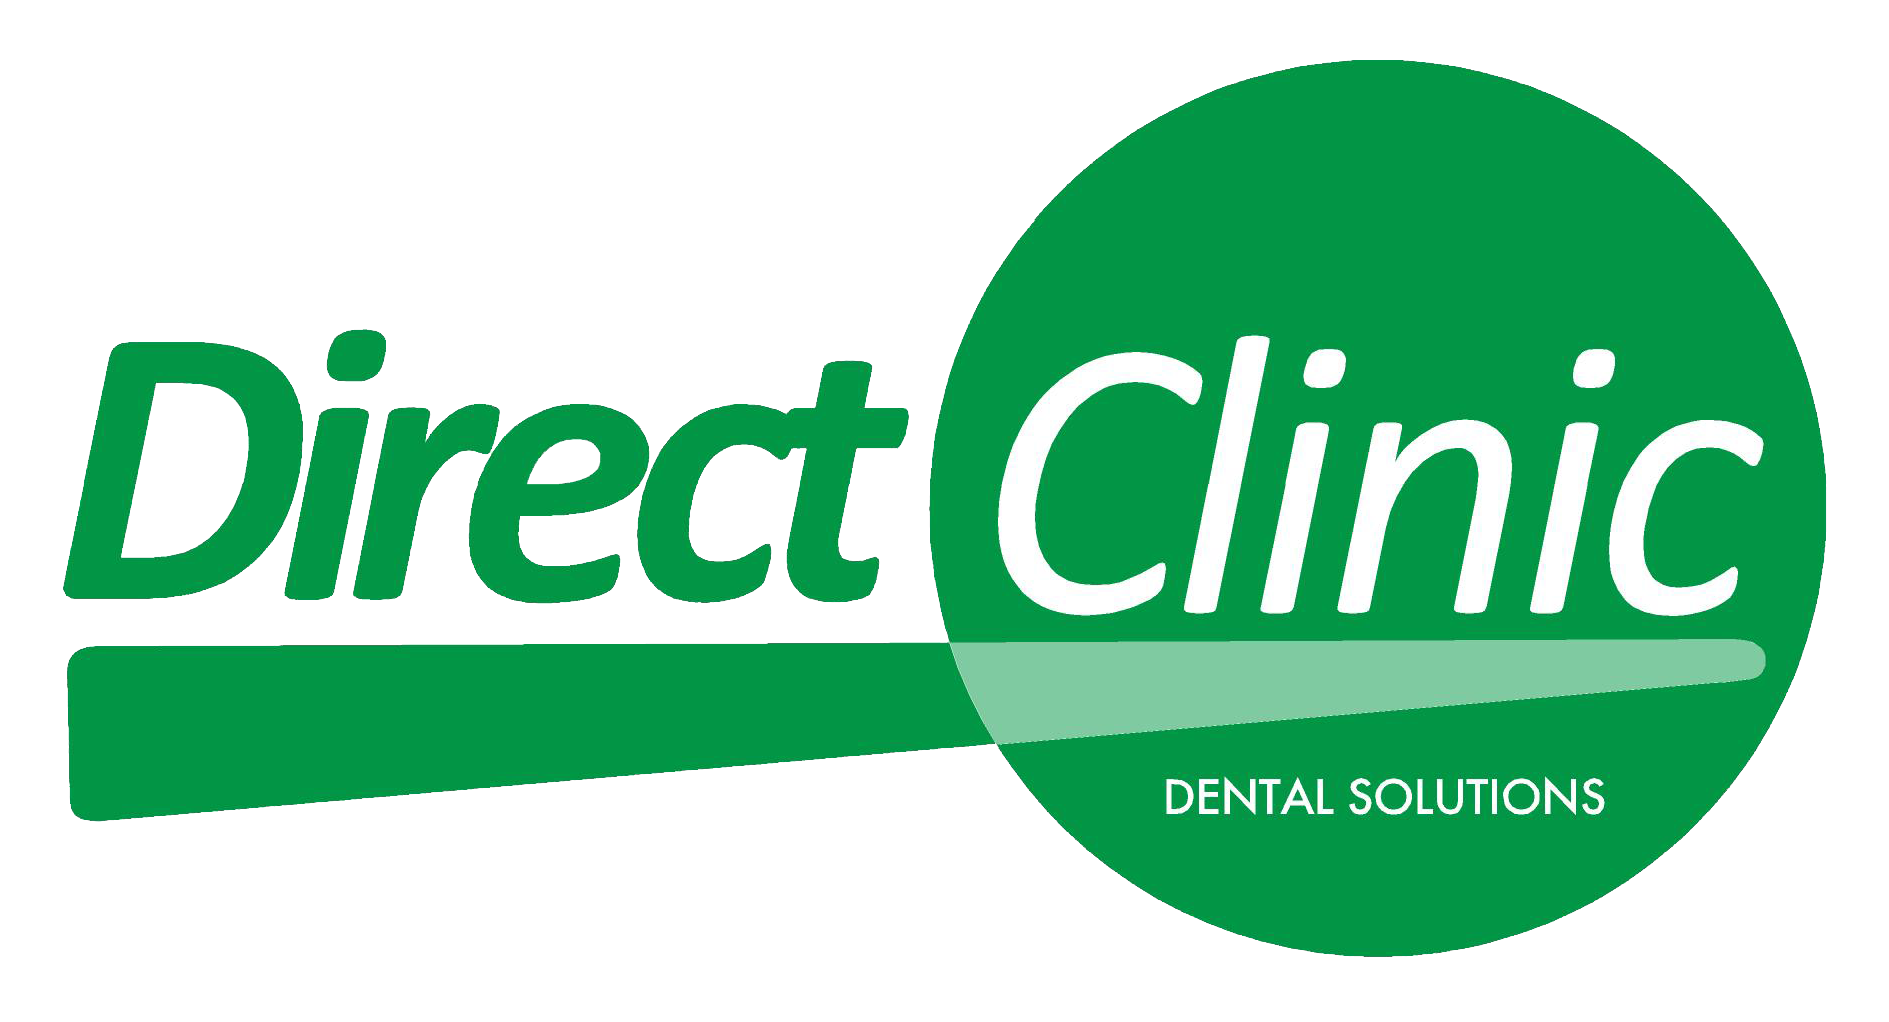 Direct Clinic